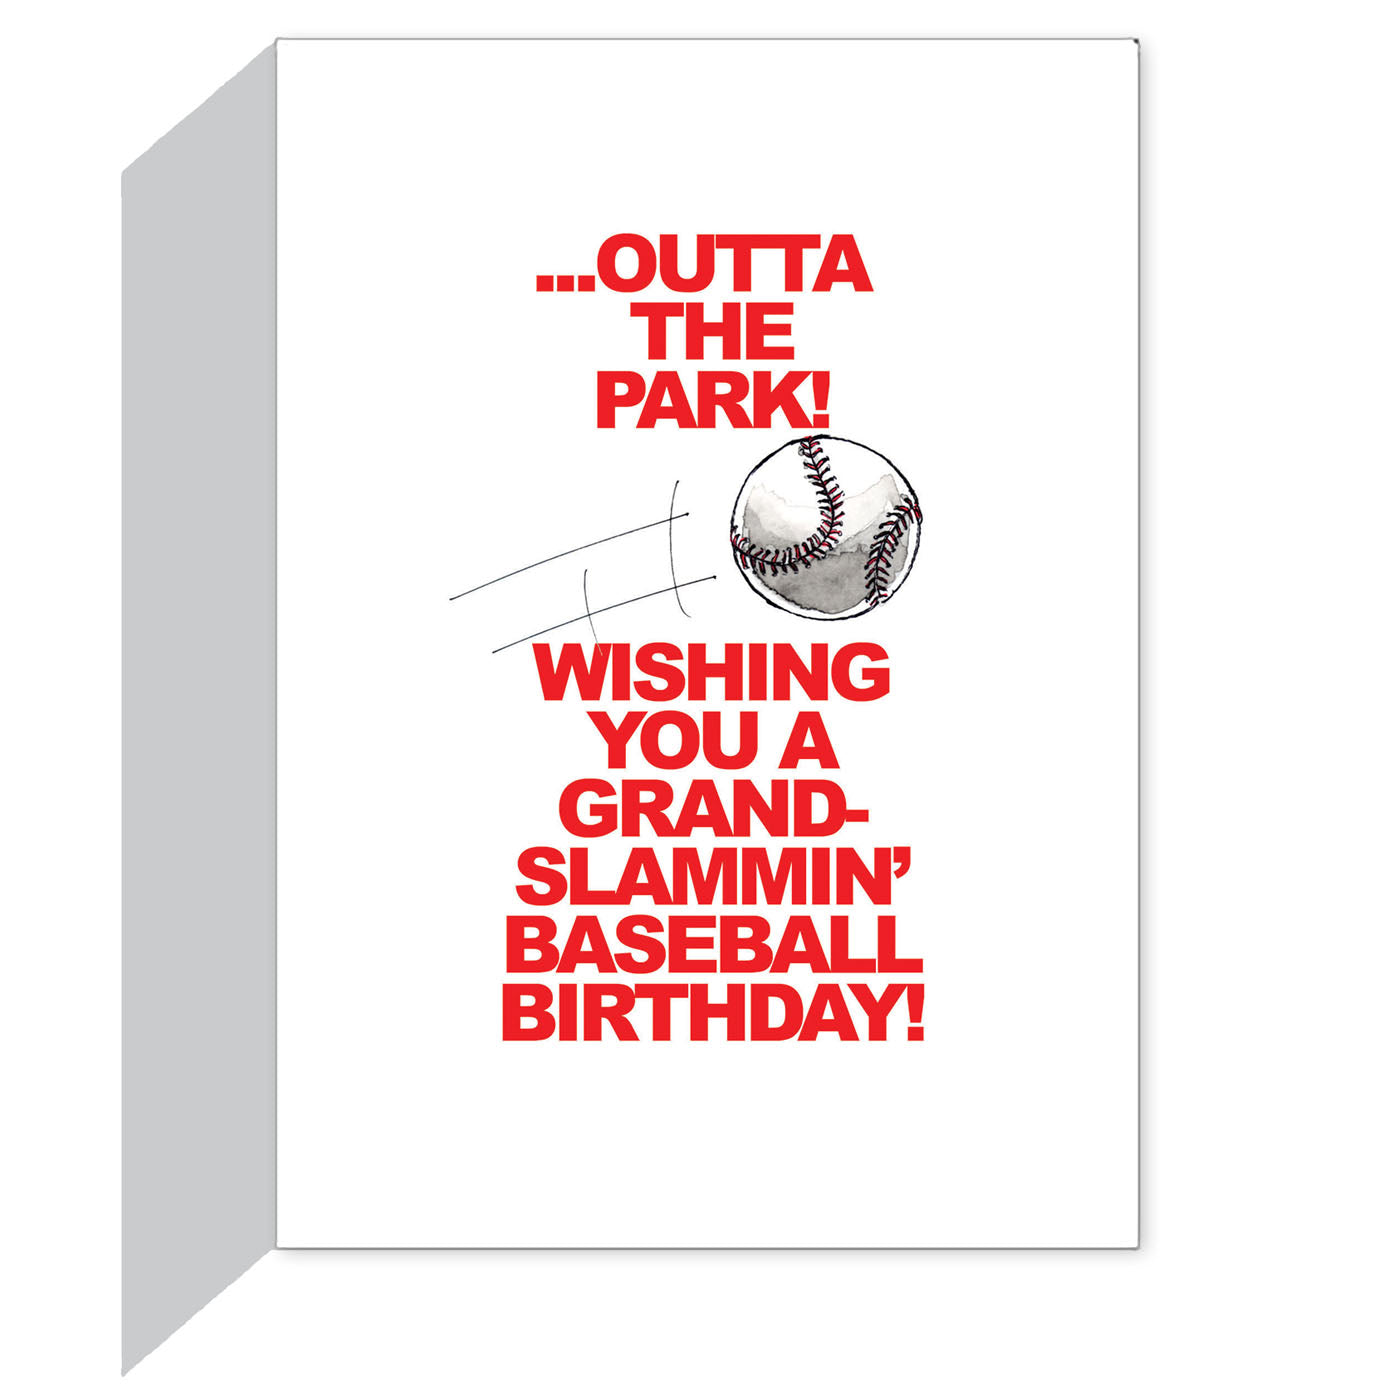 BASEBALL Birthday Power Player Birthday Card 1-Pack (5x7) Illustrated – Play Strong Sports